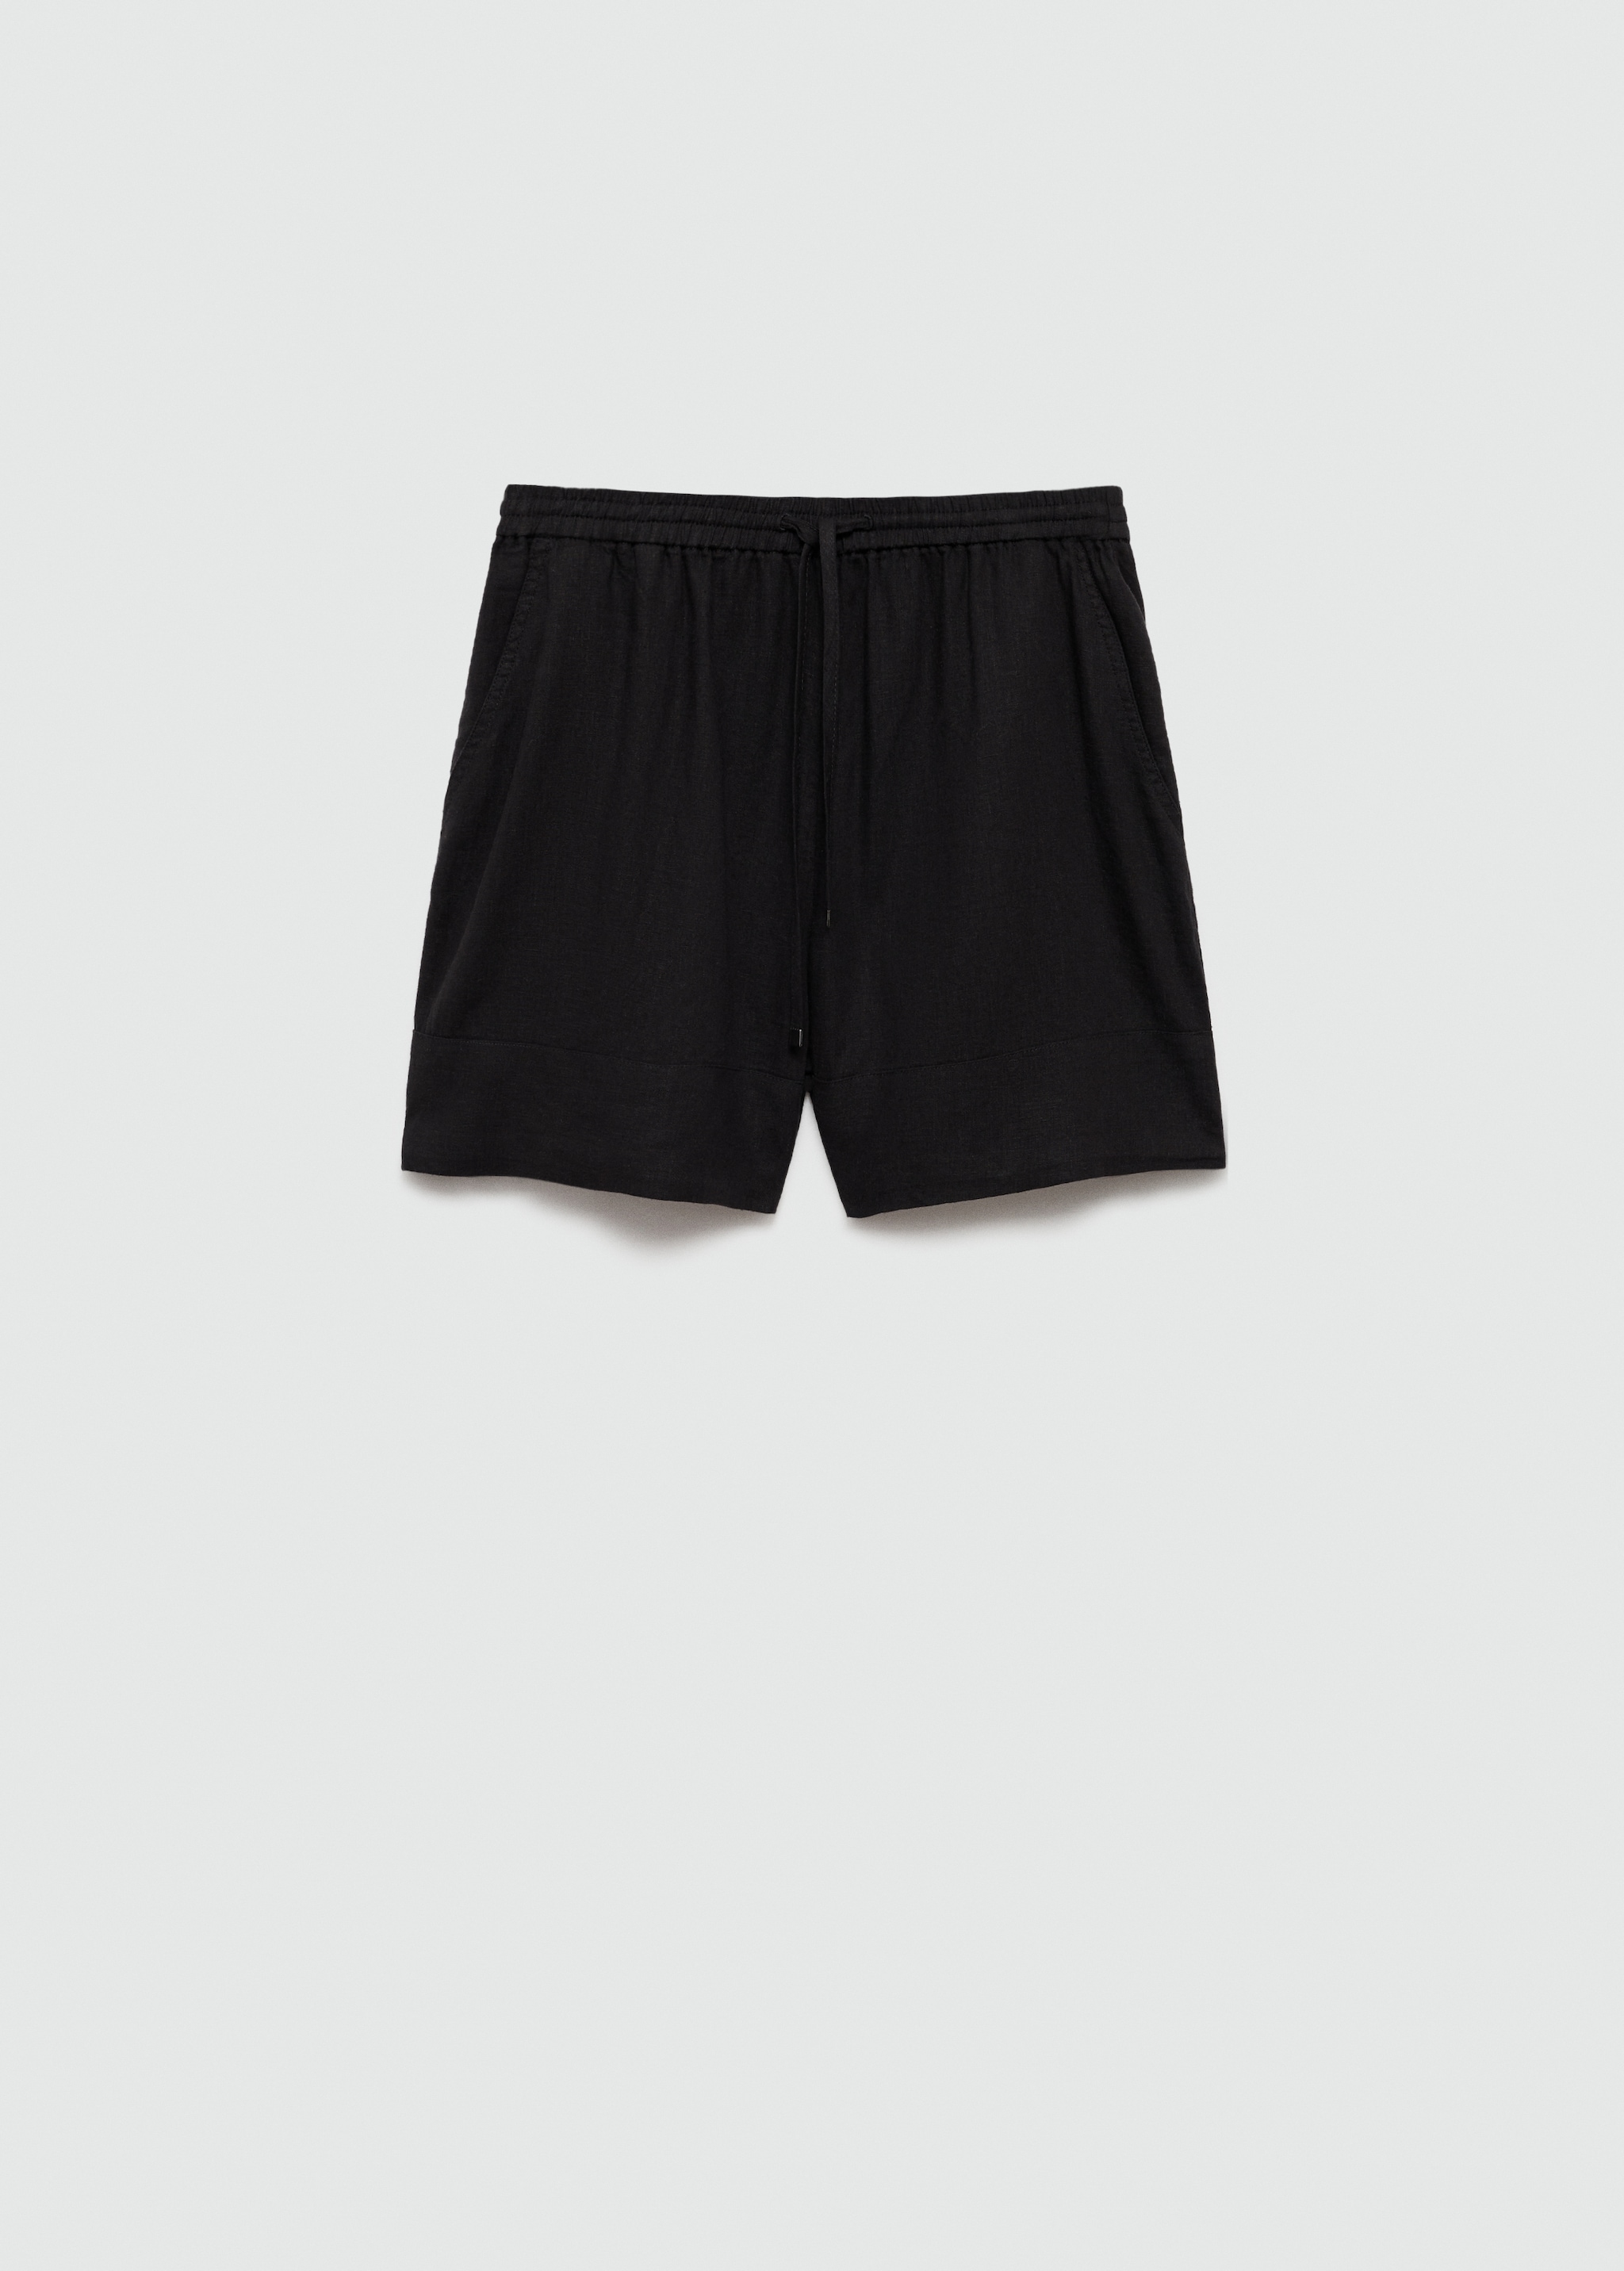 Fluid tie shorts - Article without model